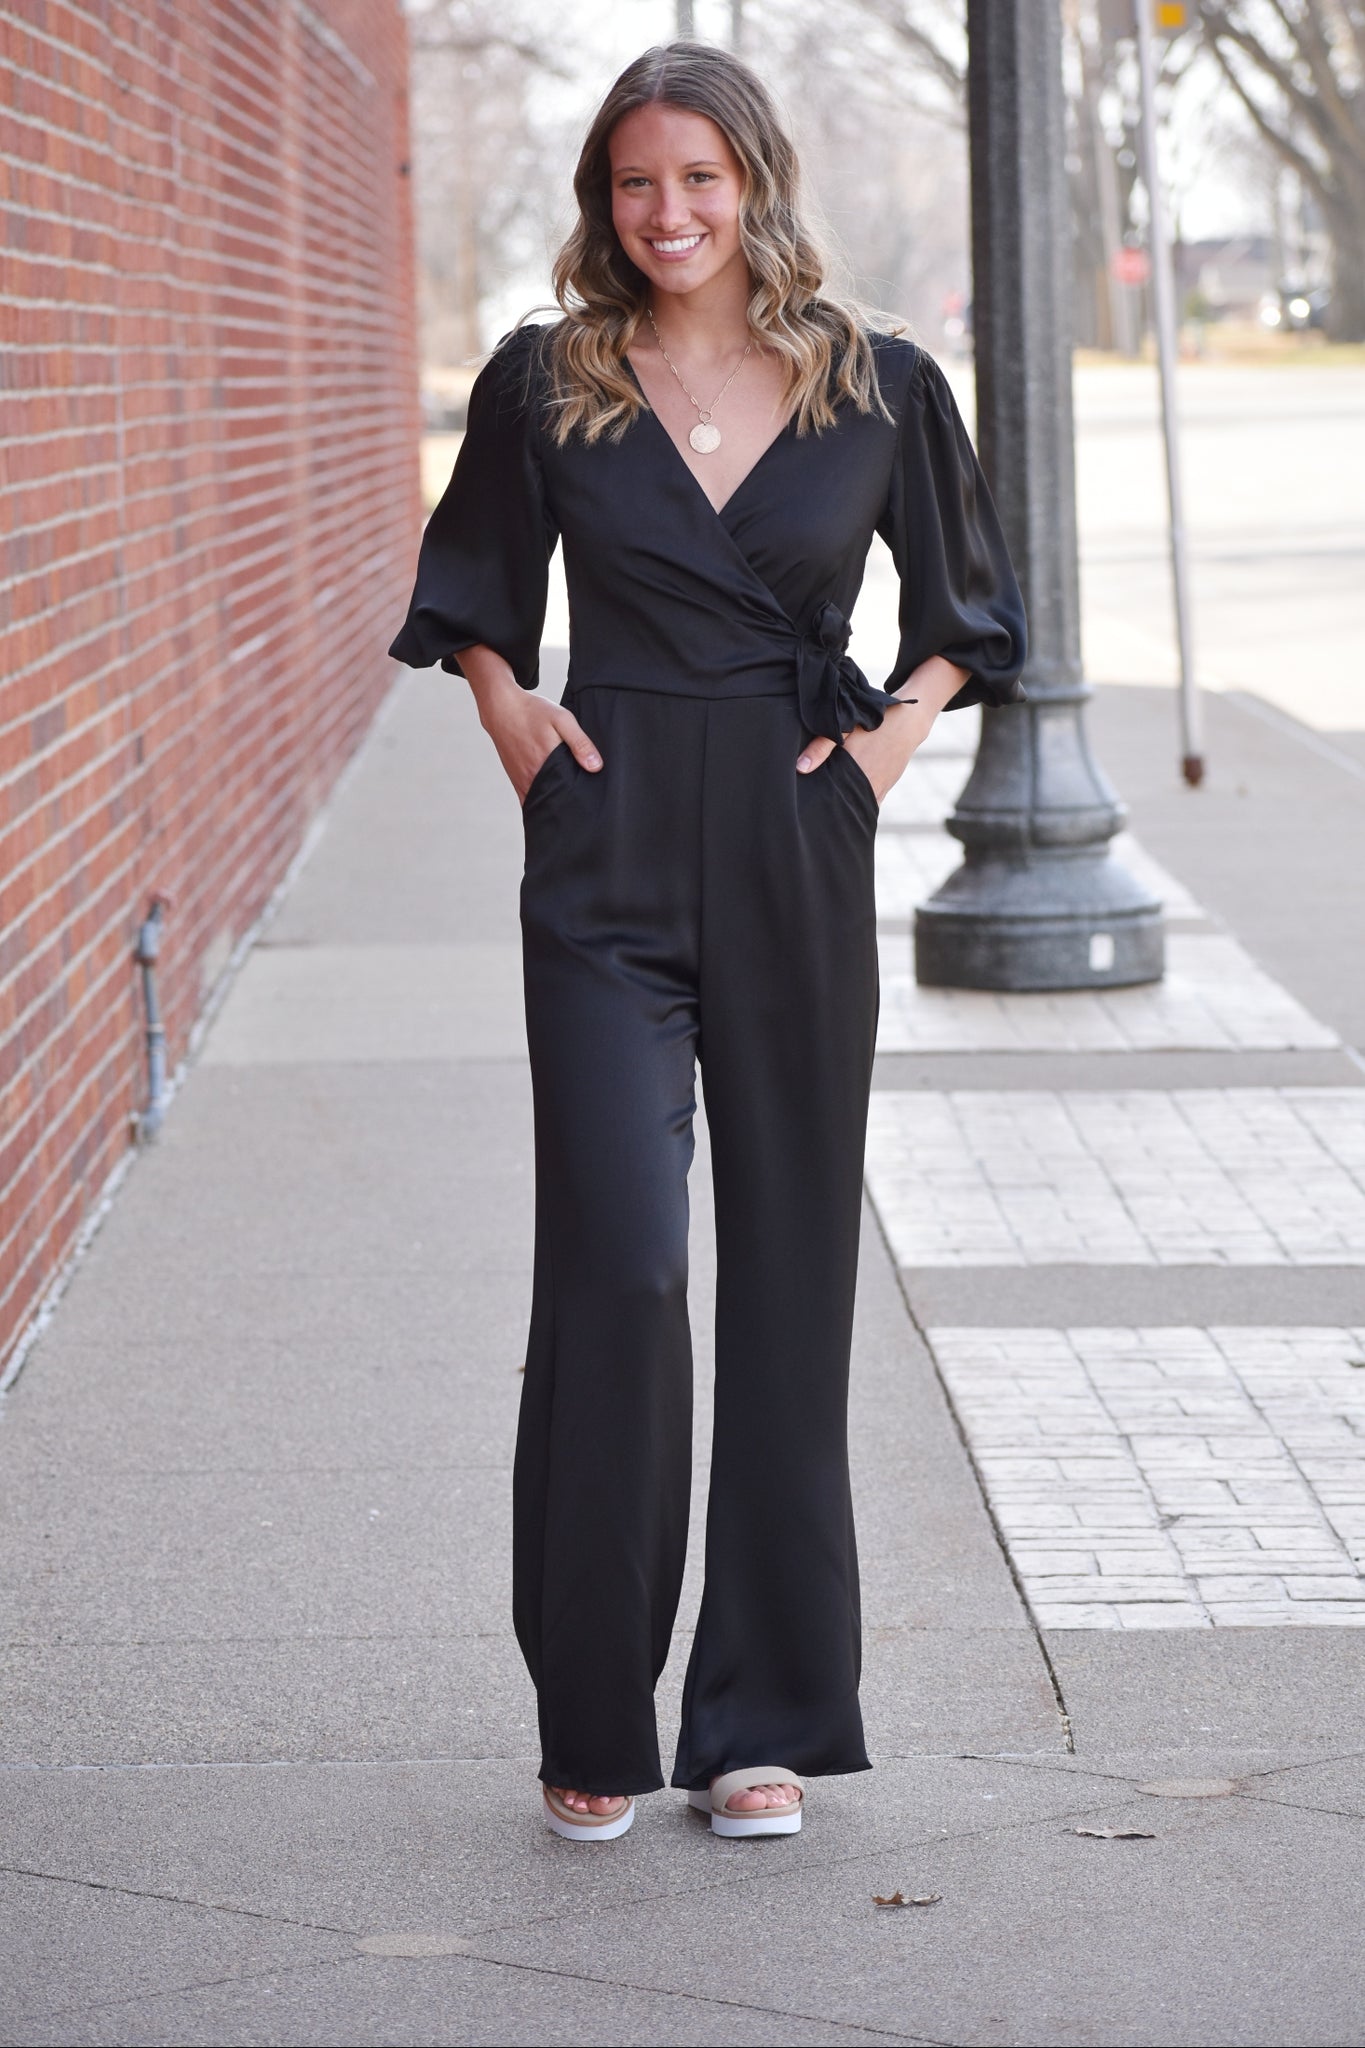 Women's Jumpsuits and Rompers, Casual Jumpsuits